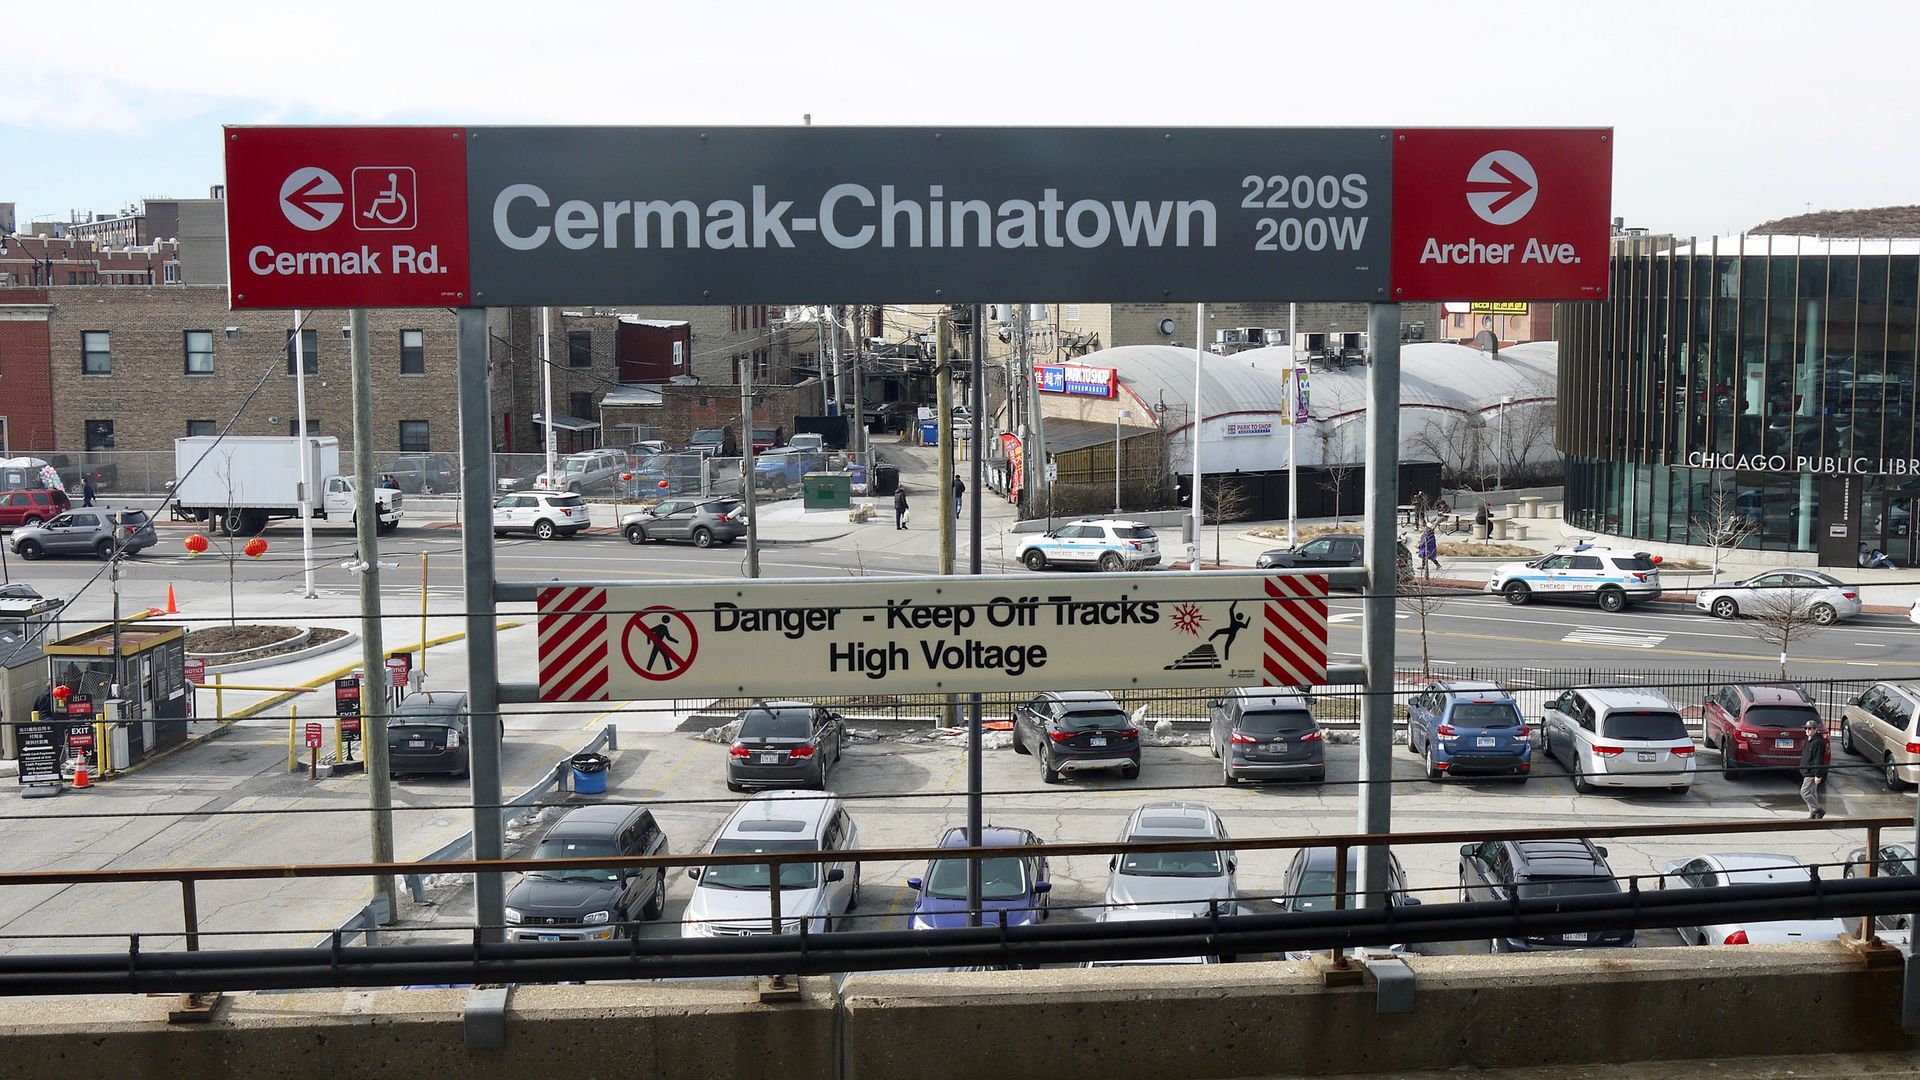 A photo of the red line "L" stop at Cermak-Chinatown 